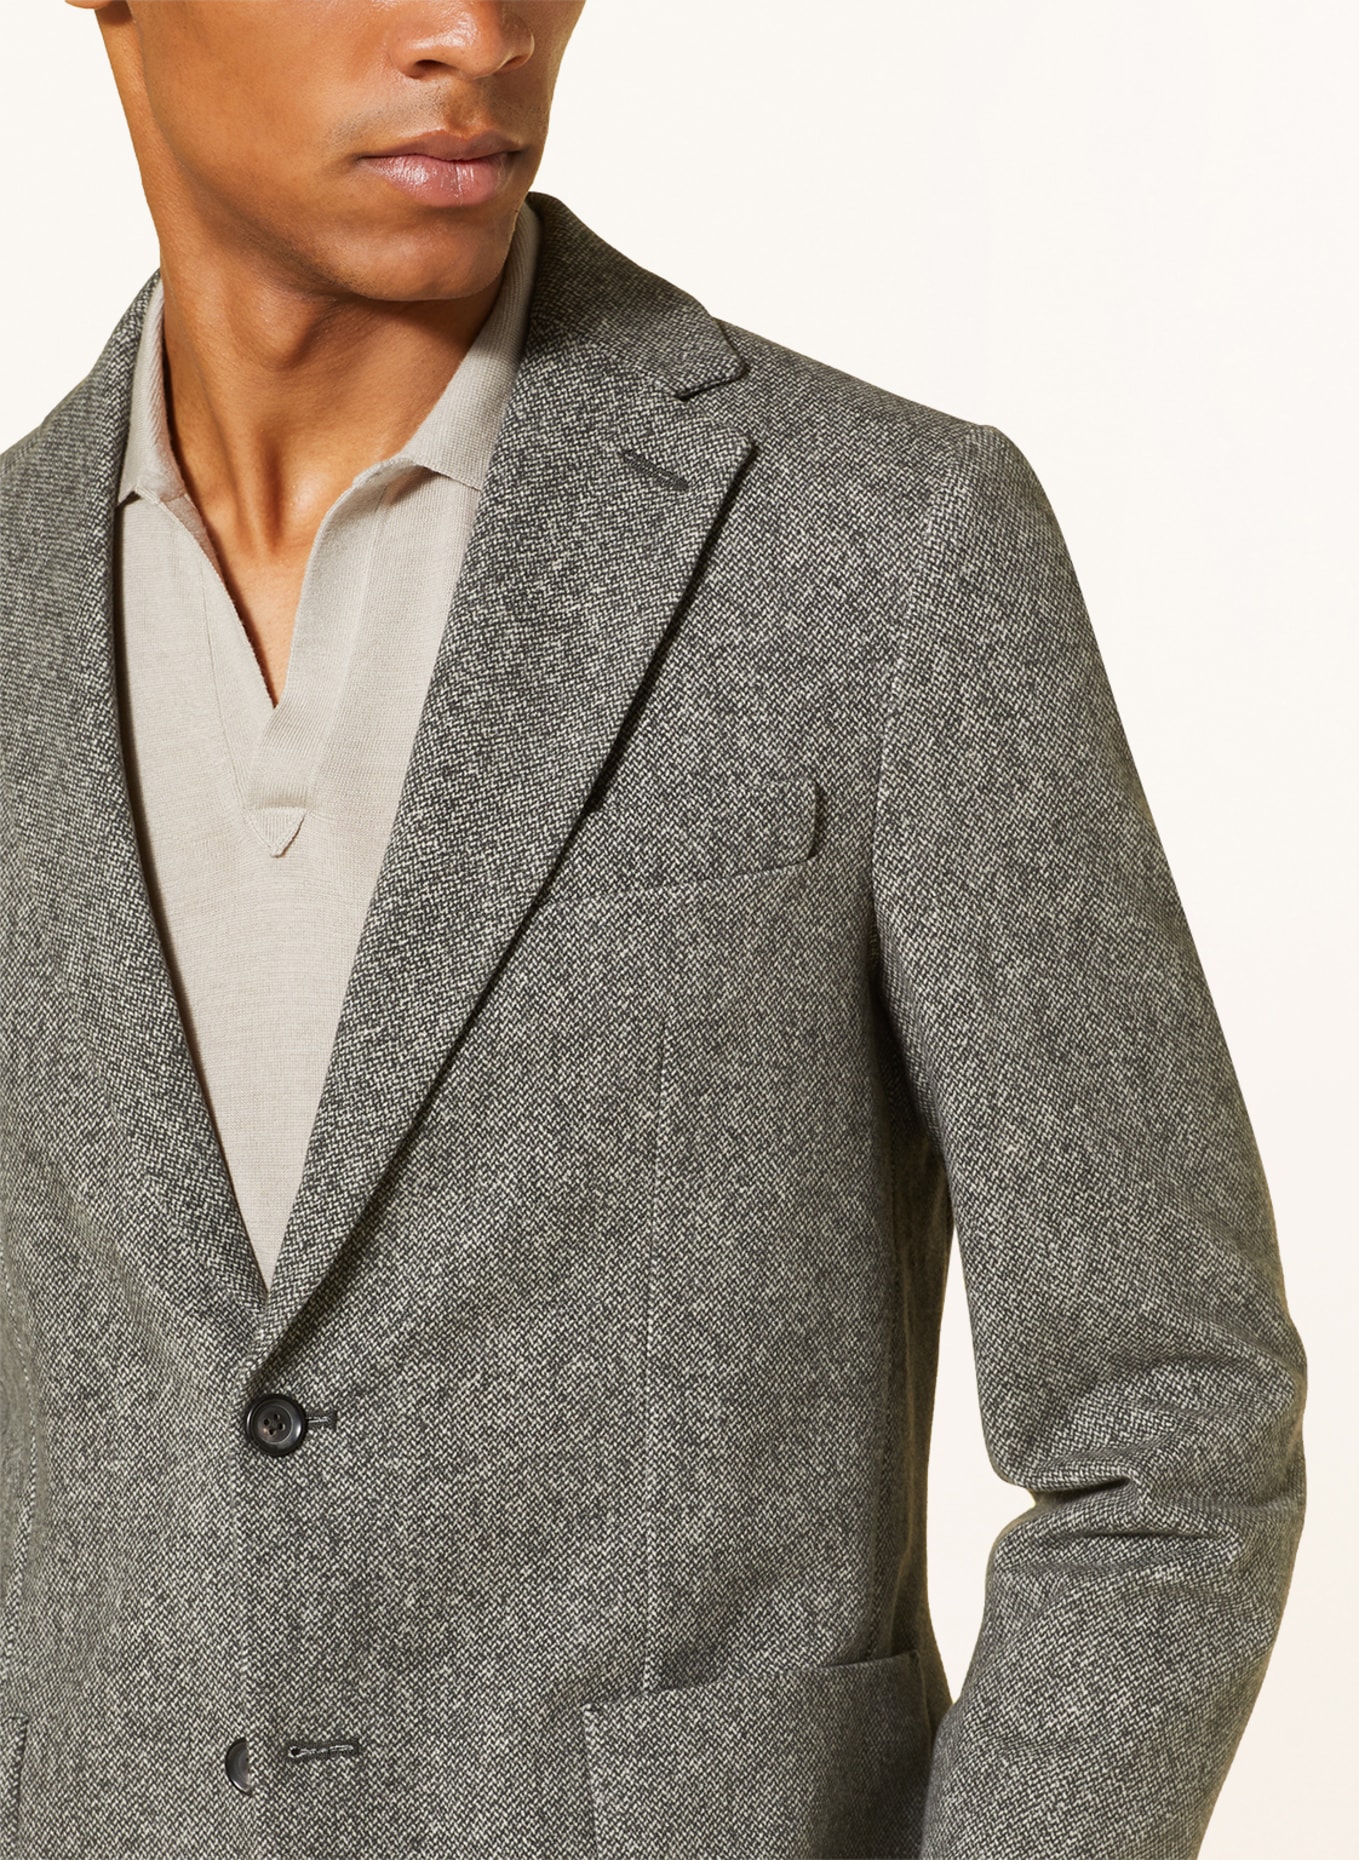 CIRCOLO 1901 Suit jacket extra slim fit made of jersey, Color: CARBO CARBONE-L (Image 5)